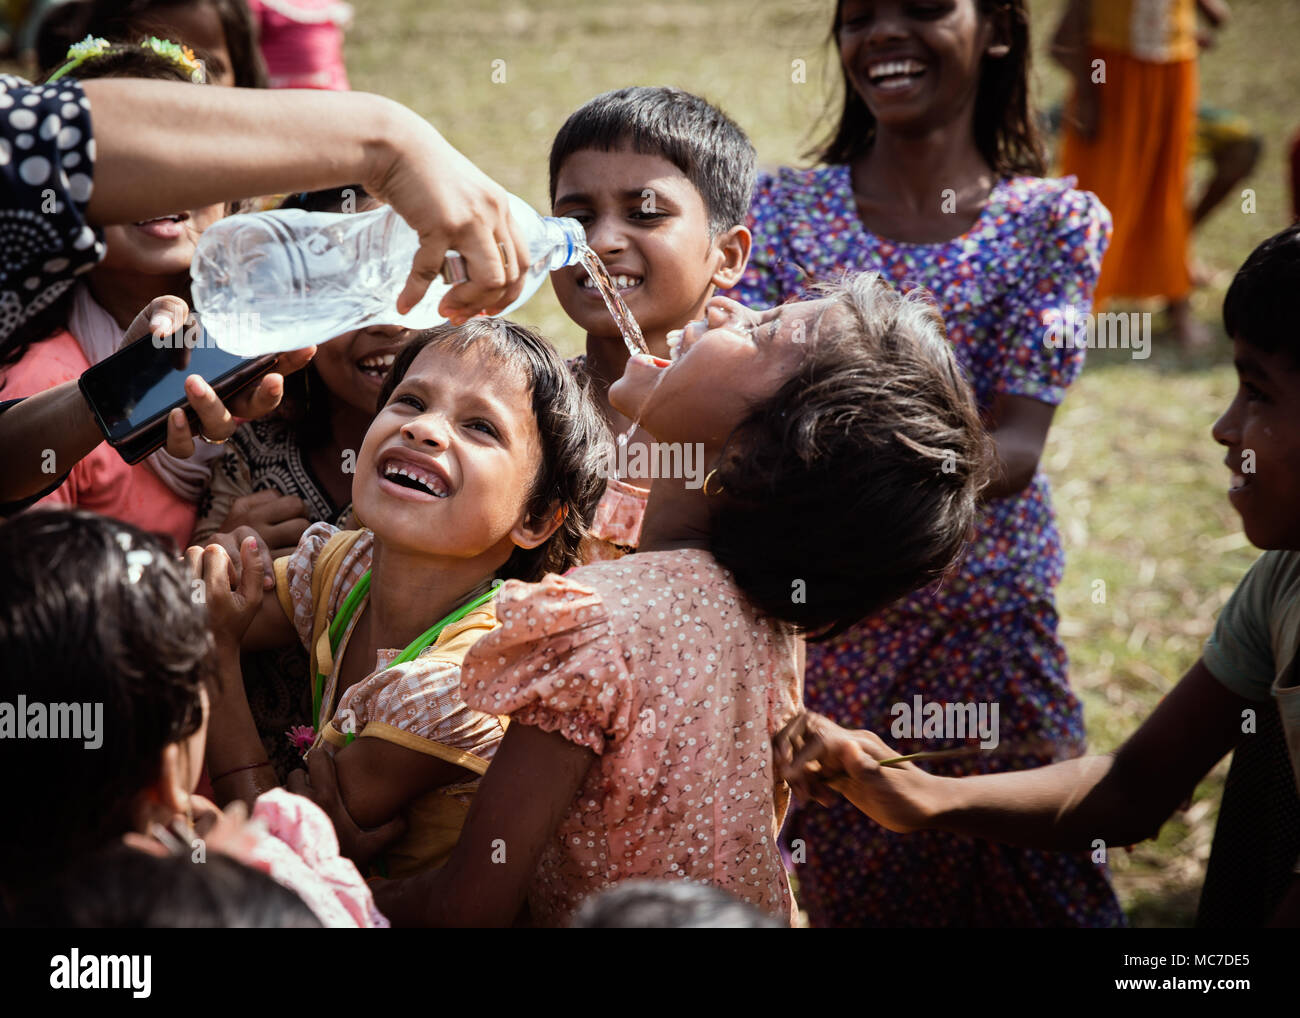 A Rohingya woman gives water to children while they play in nearby fields. There are now approximately 600,000 Rohingya refugees in the Kutupalong refugee camp of Southern Bangladesh. While preparations are now being made for the Monsoon season which is fast approaching, many NGO’s have left leaving much work to be done to make up for their shortfall. Stock Photo